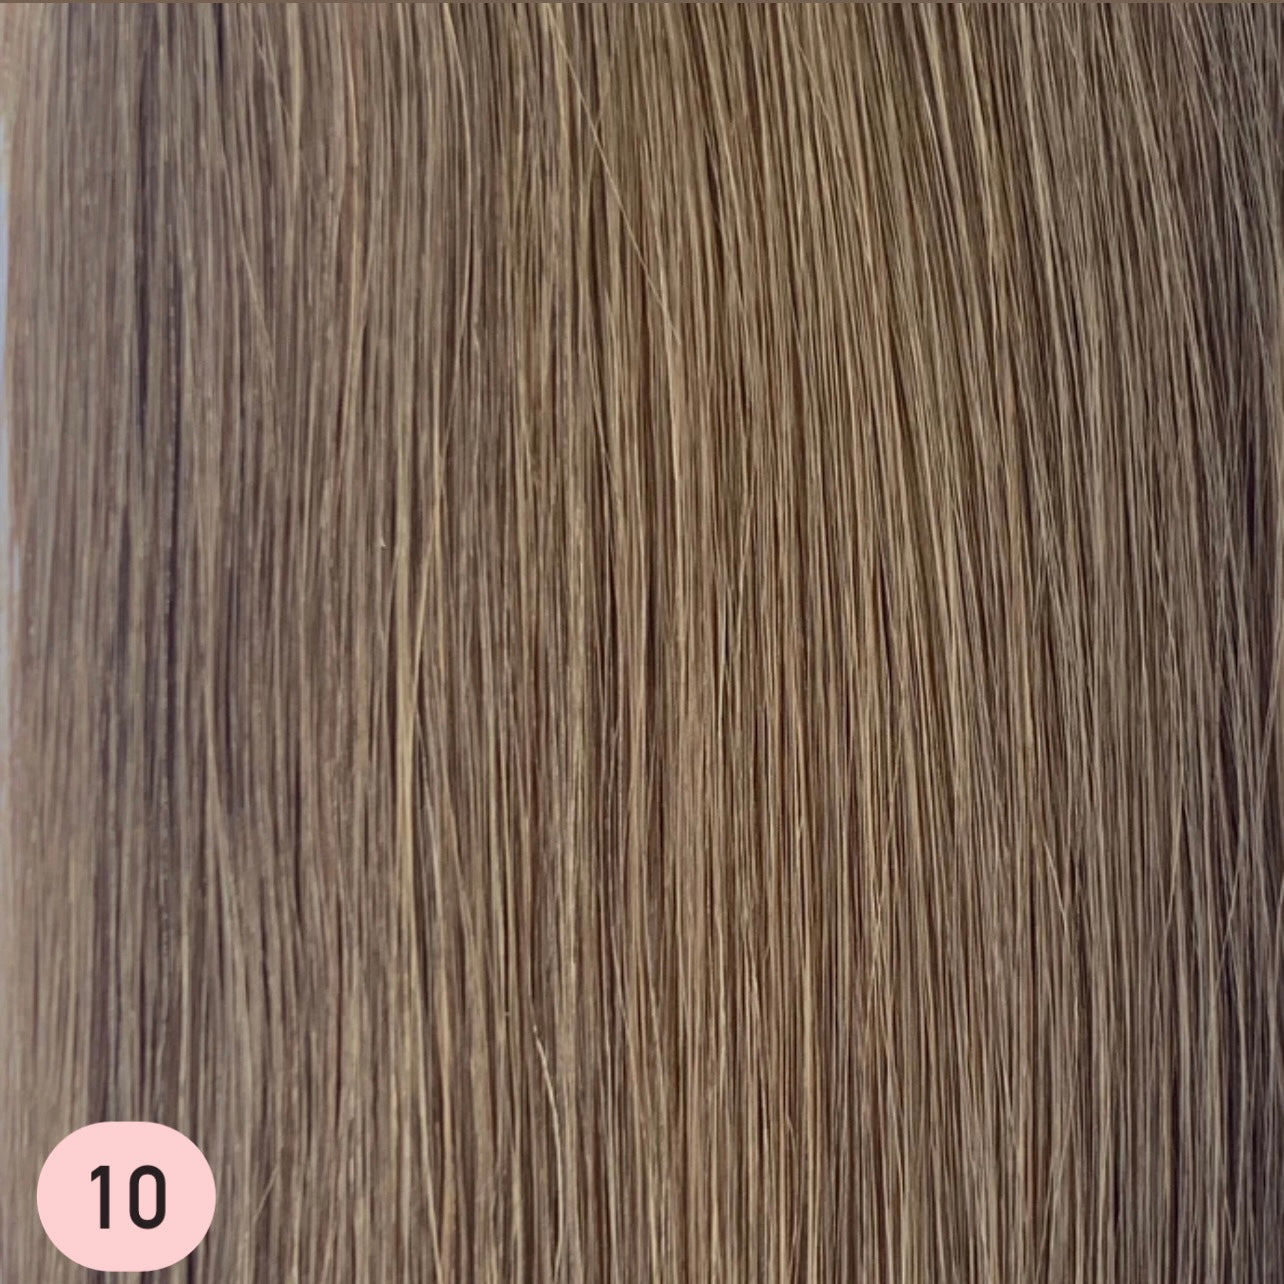 24" NATURAL ASH BROWN Russian Hair Tape Extensions 20pc